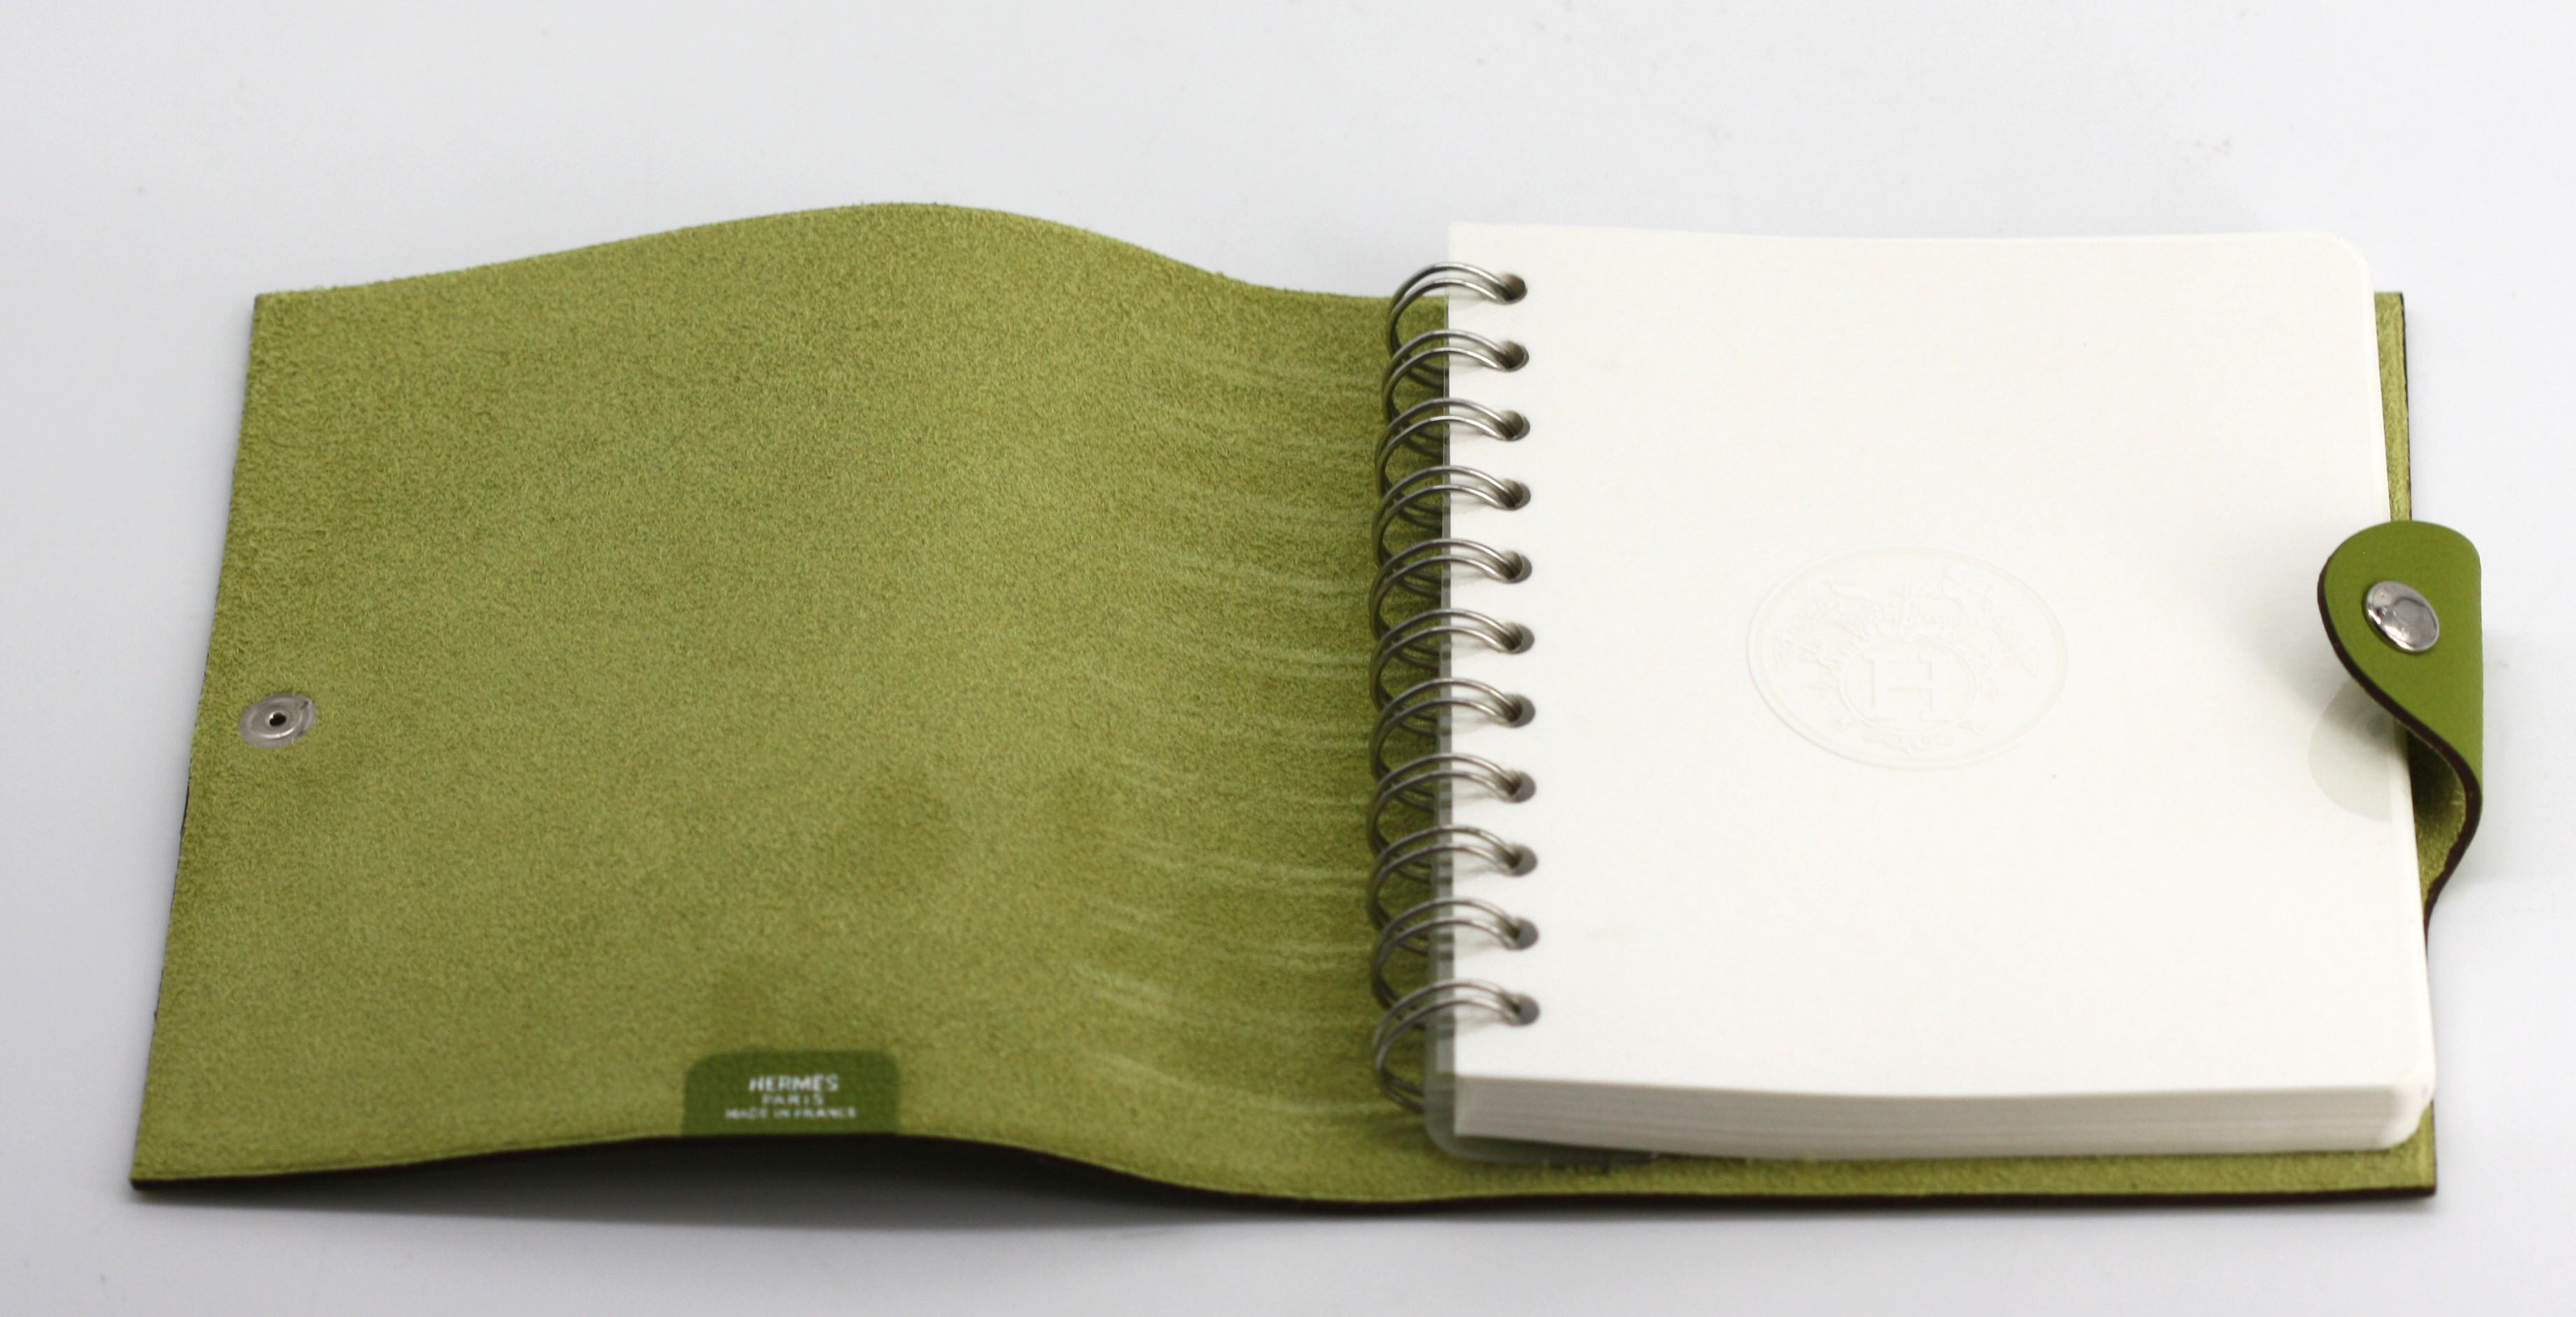 Women's or Men's Hermes Anis/Kiwi Green Togo Leather Notebook Cover, with Spiral inset, 2009 For Sale